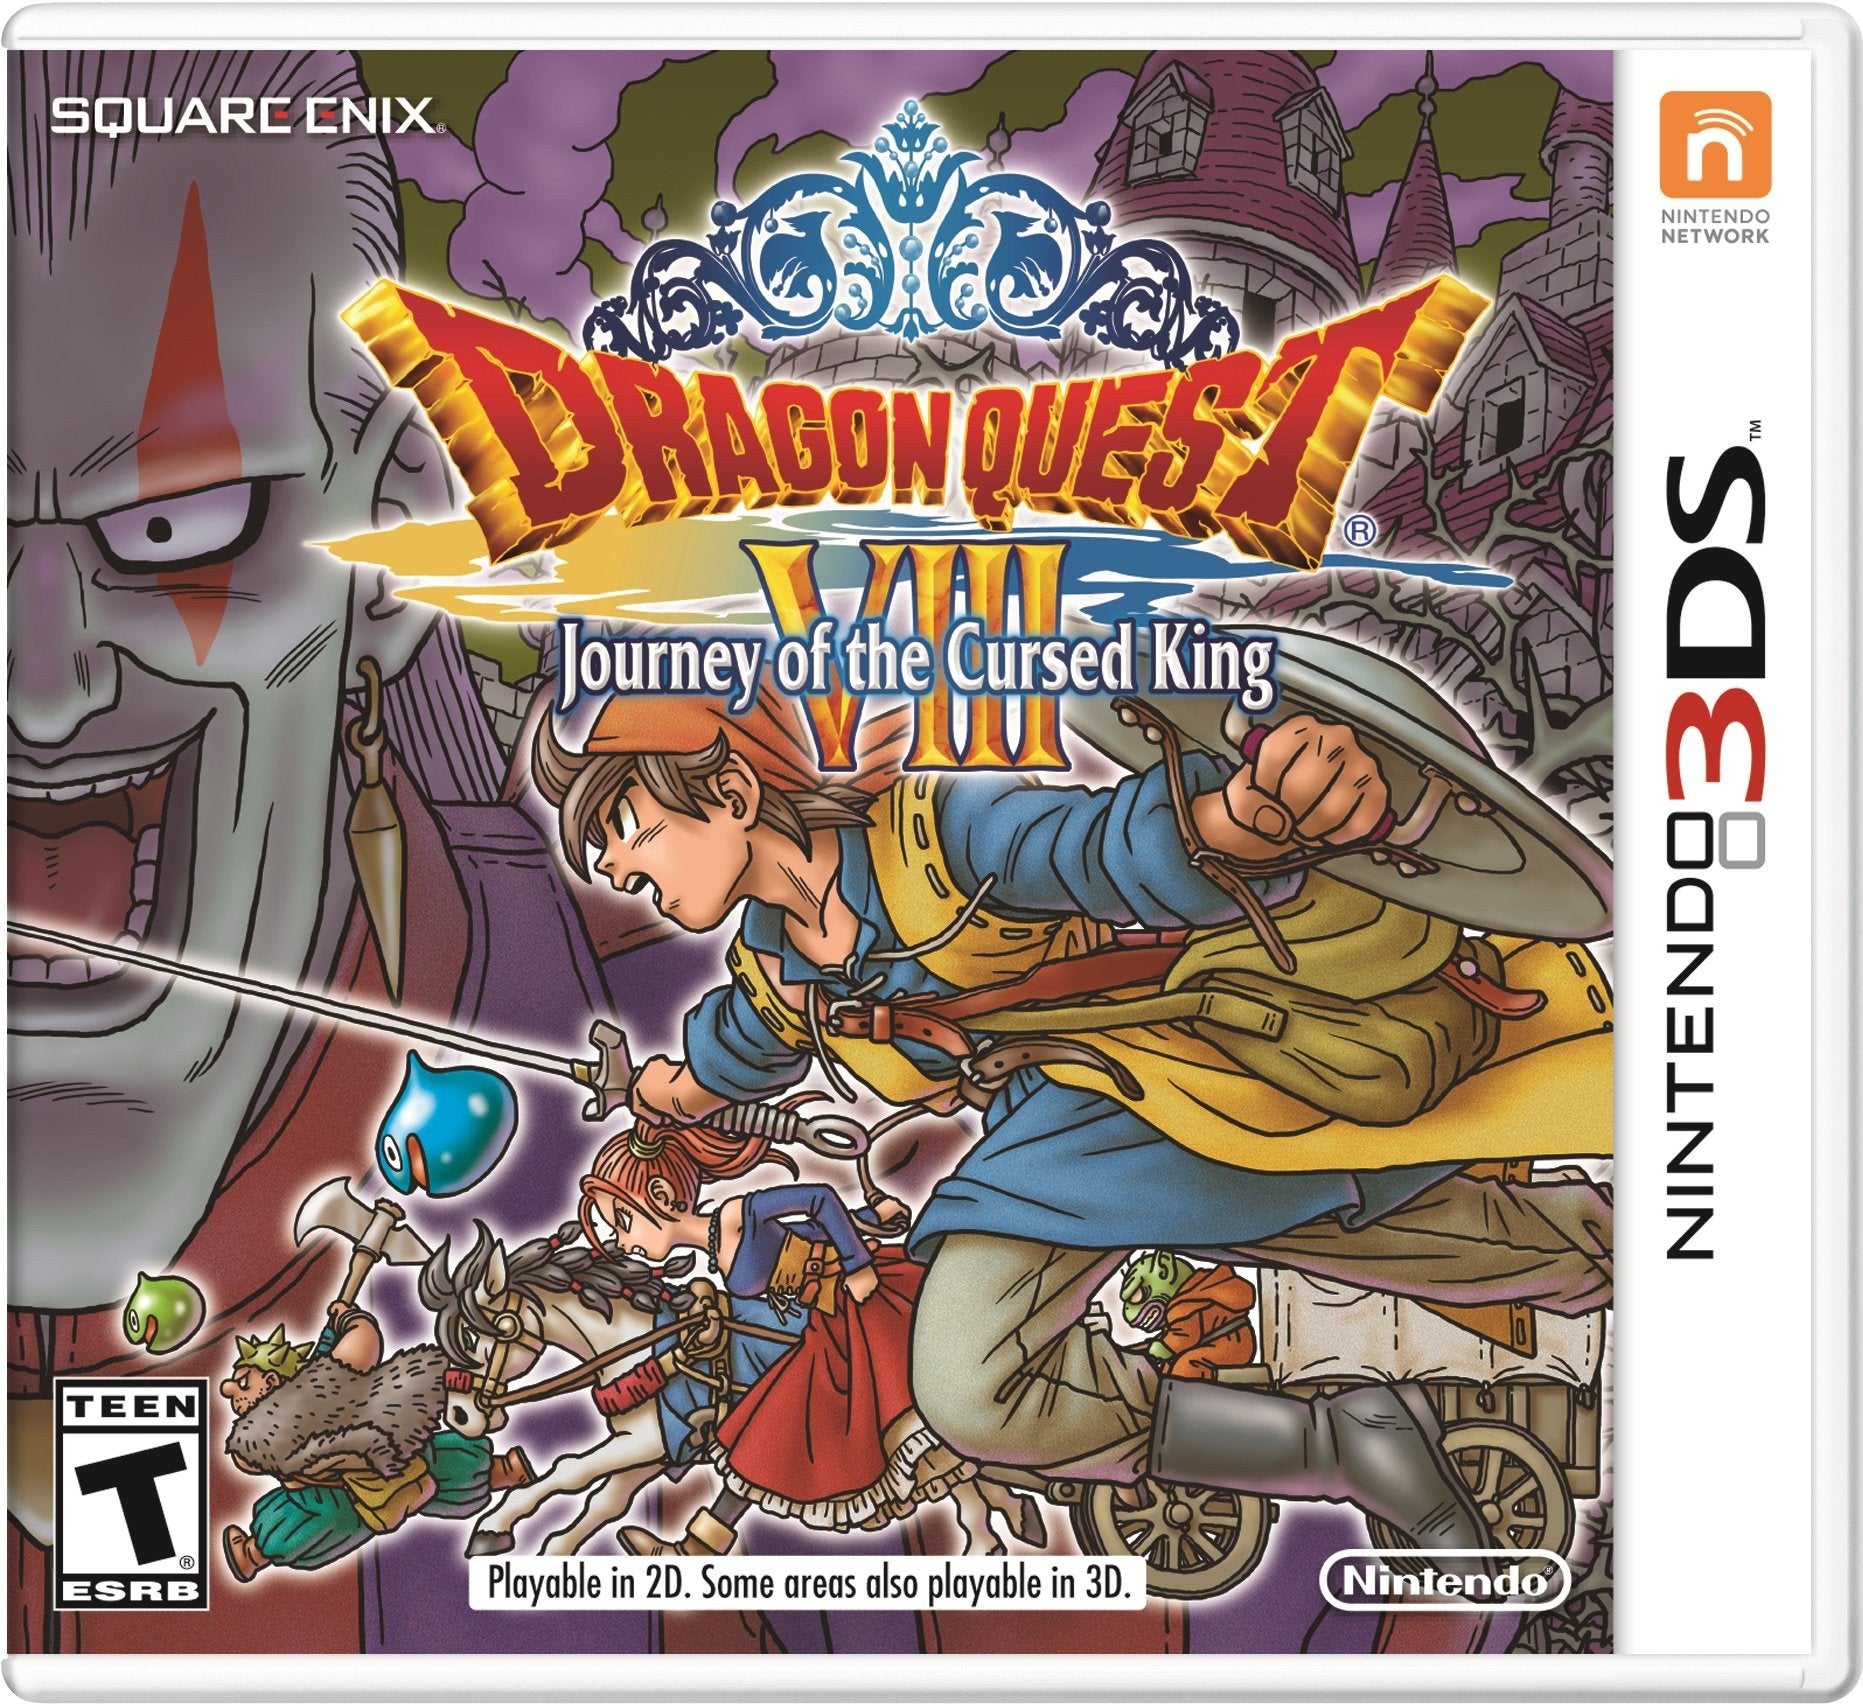 J2Games.com | Dragon Quest VIII Journey of the Cursed King (Nintendo 3DS) (Brand New).